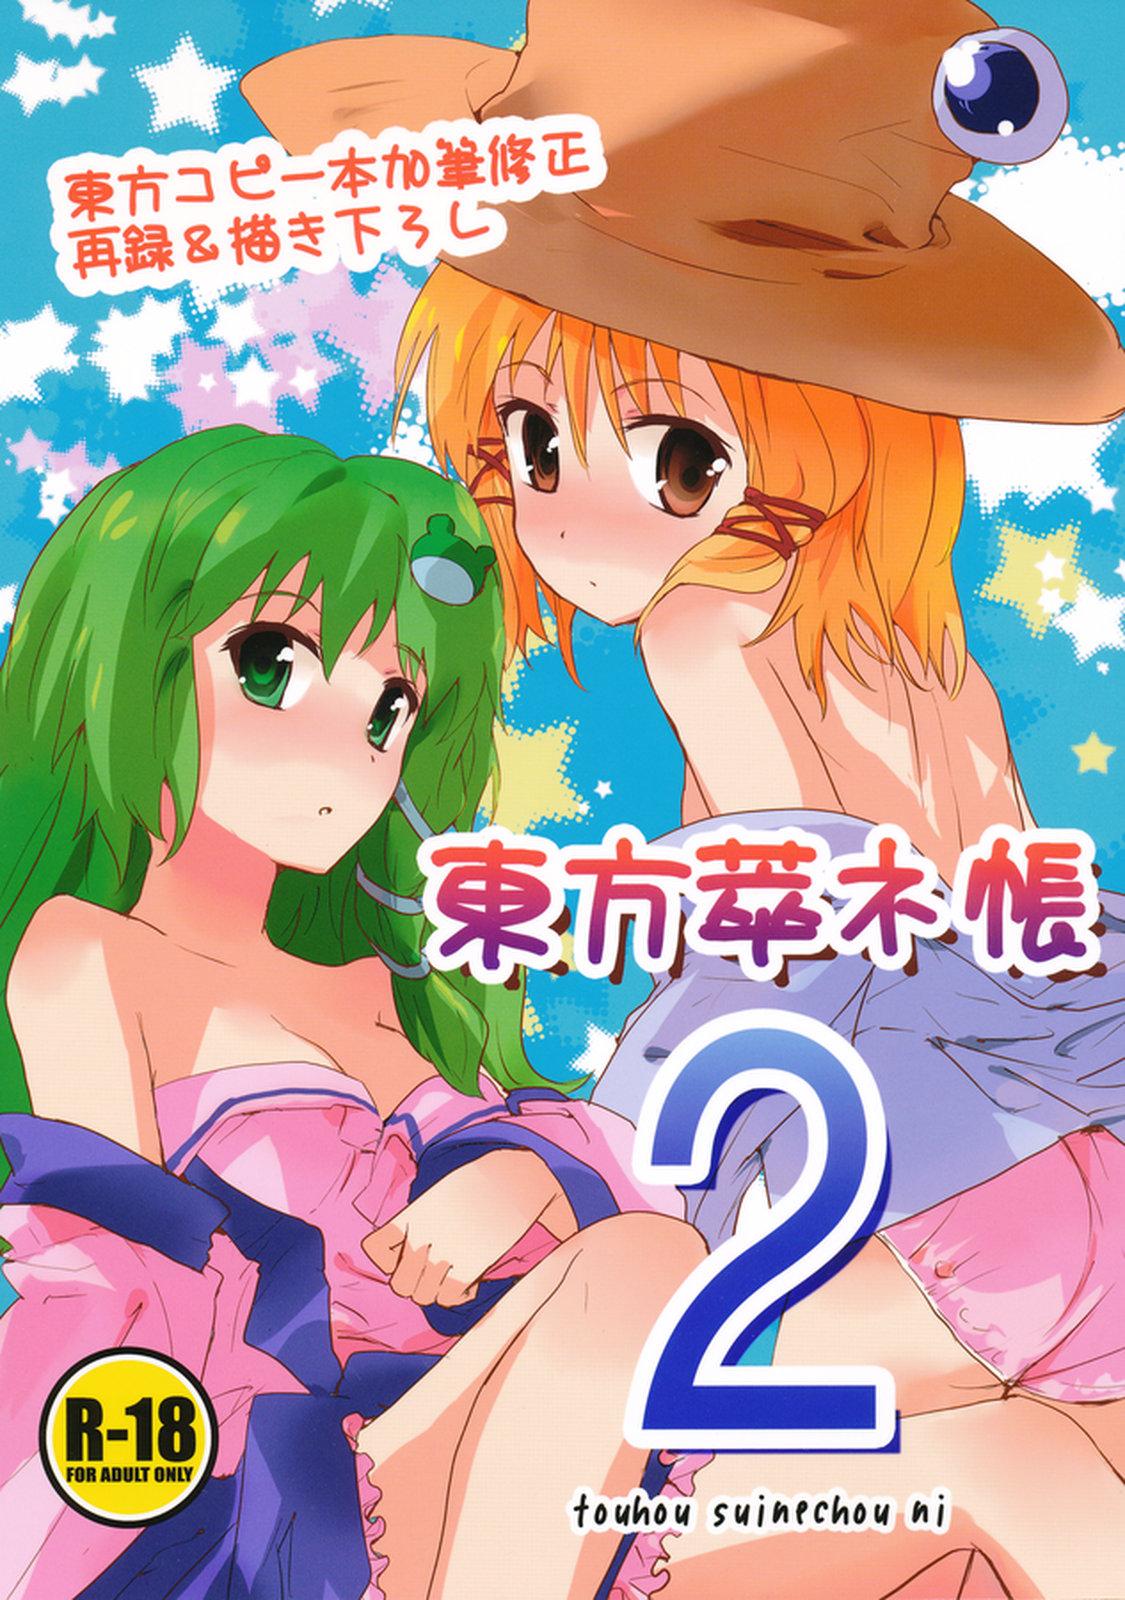 Hooker Touhou Suinechou 2 - Touhou project Jap - Page 1